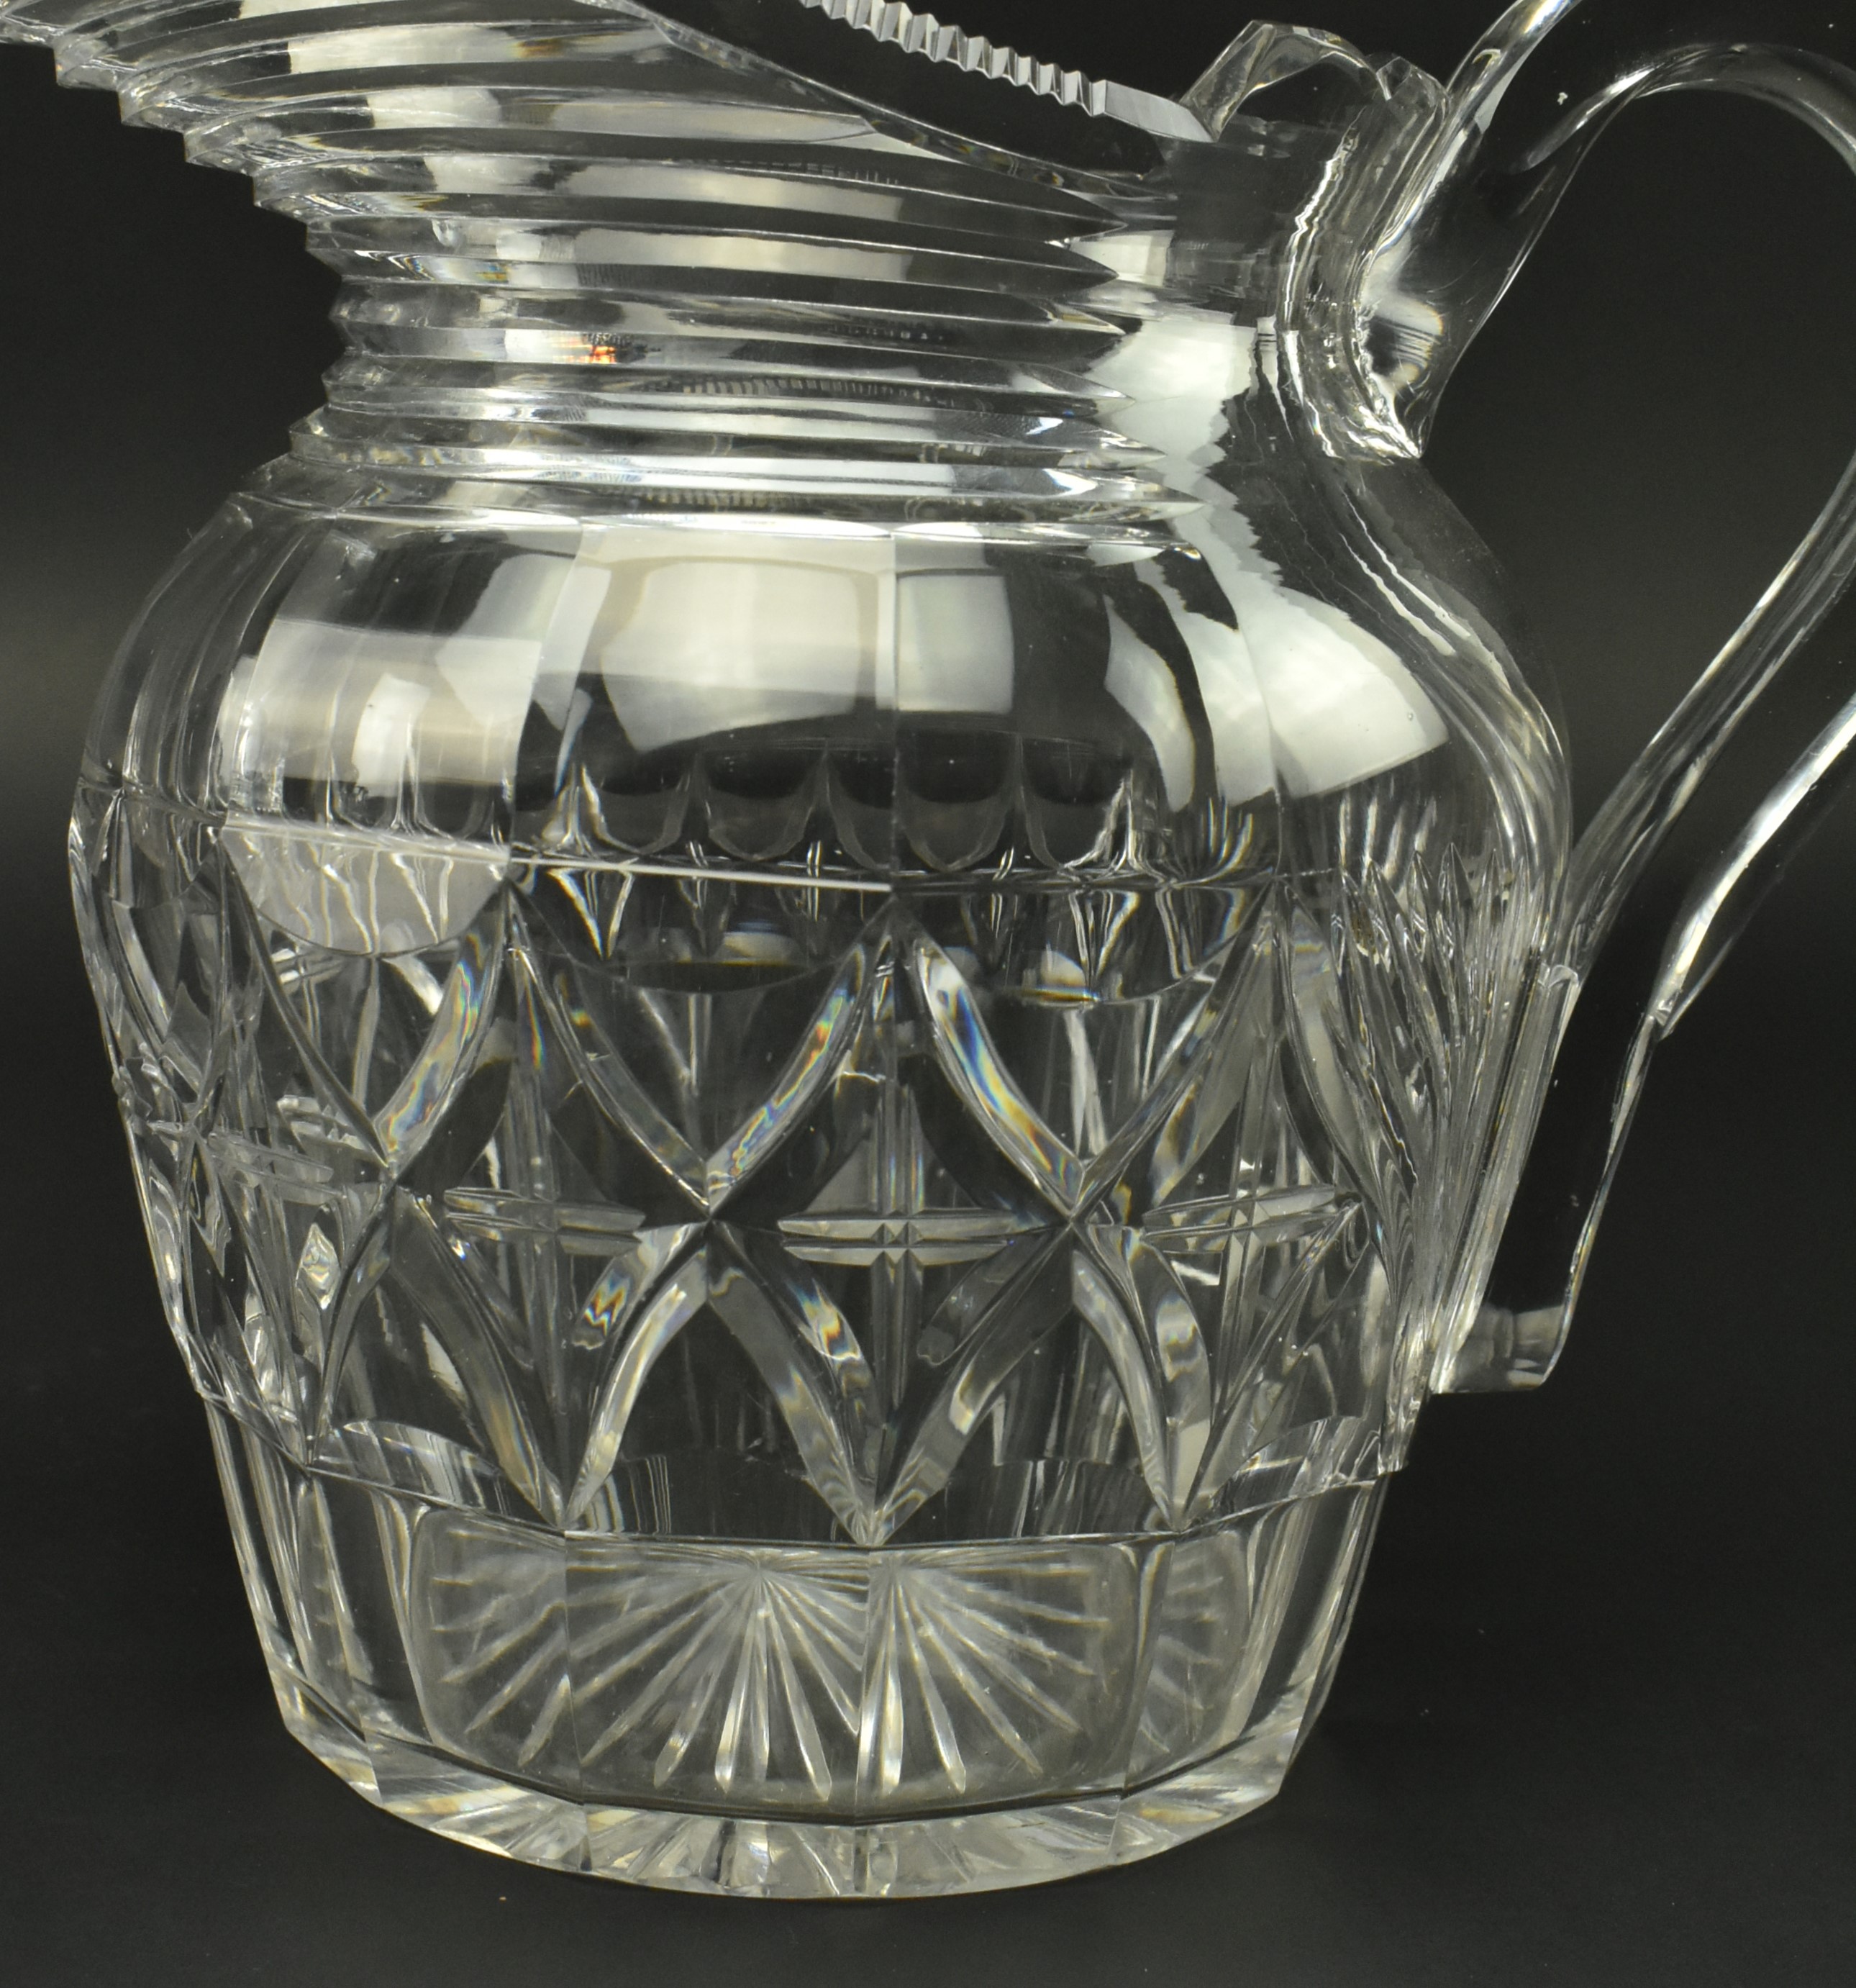 FOUR EARLY 19TH CENTURY GLASS JUGS WITH STEP CUT DESIGN - Image 10 of 11